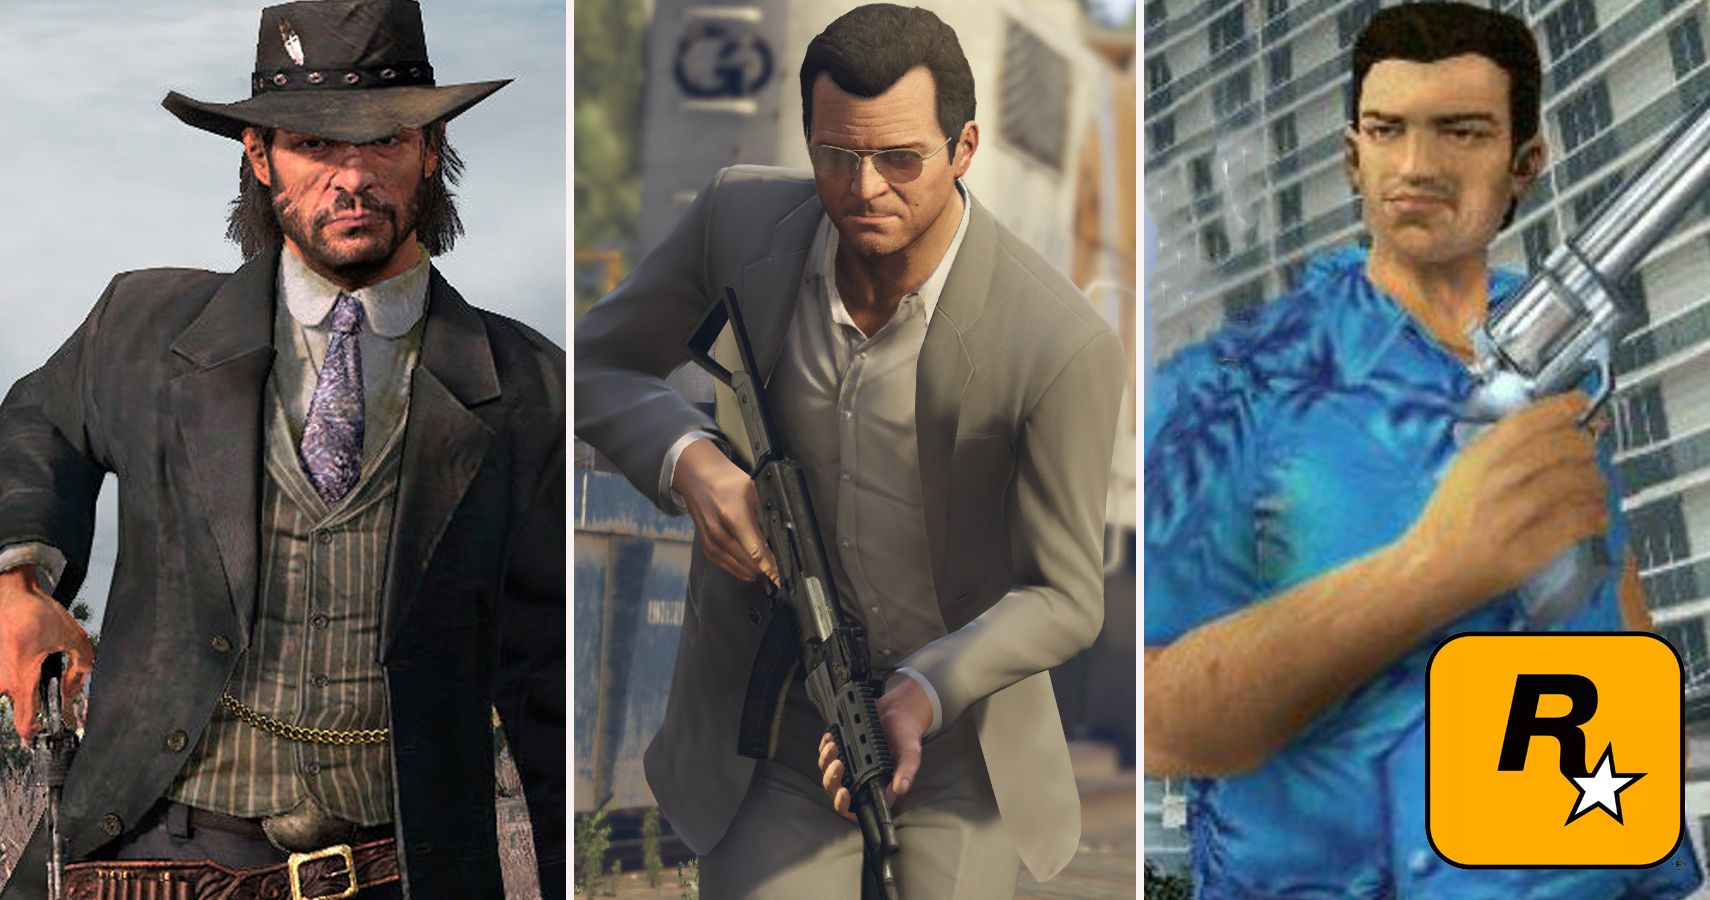 Pay what you want for Rockstar Games, including Grand Theft Auto IV, all of  Max Payne, all of L.A. Noir, and more! - Armchair Arcade